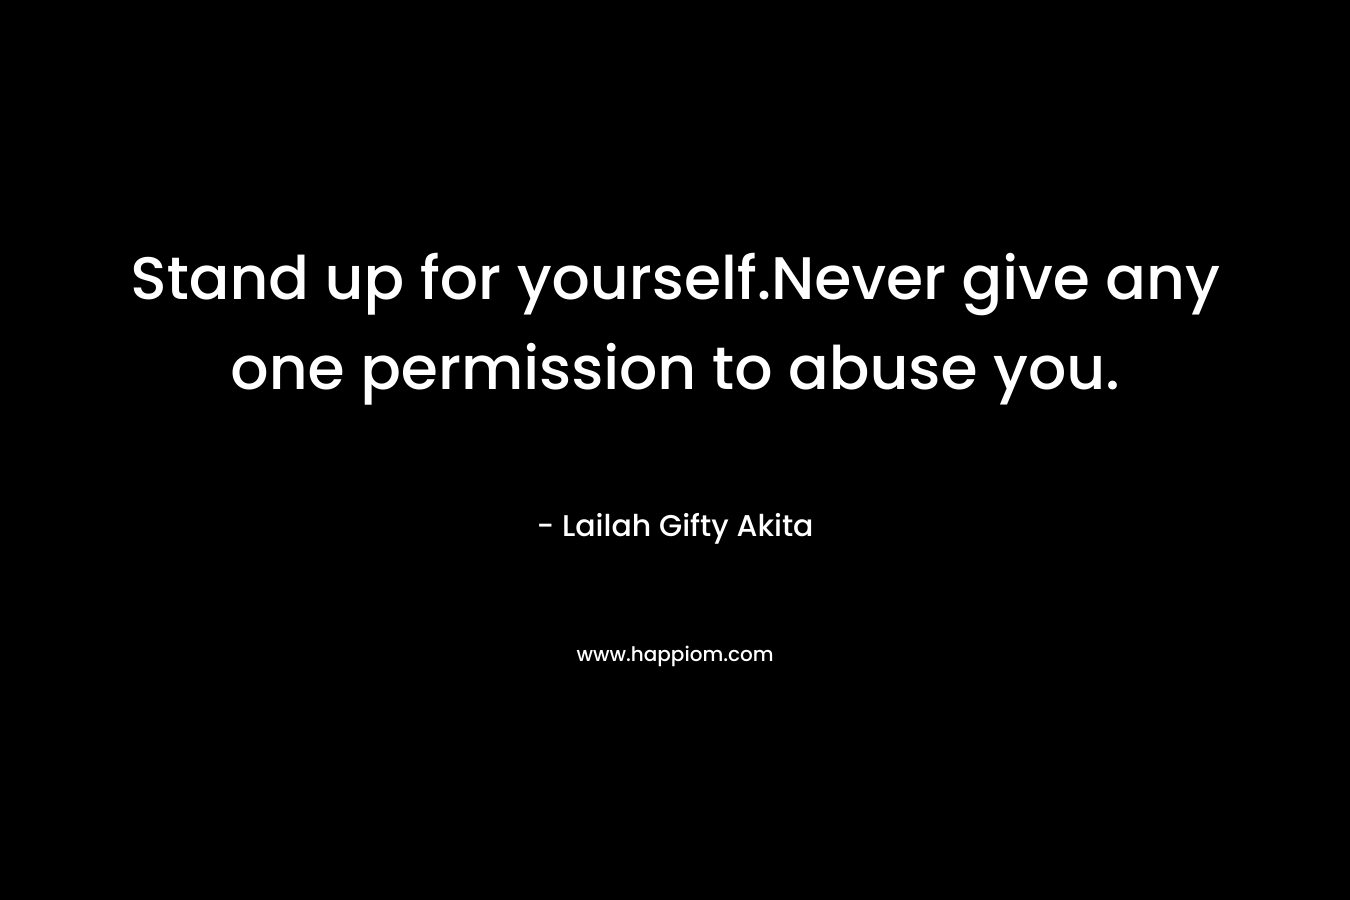 Stand up for yourself.Never give any one permission to abuse you. – Lailah Gifty Akita